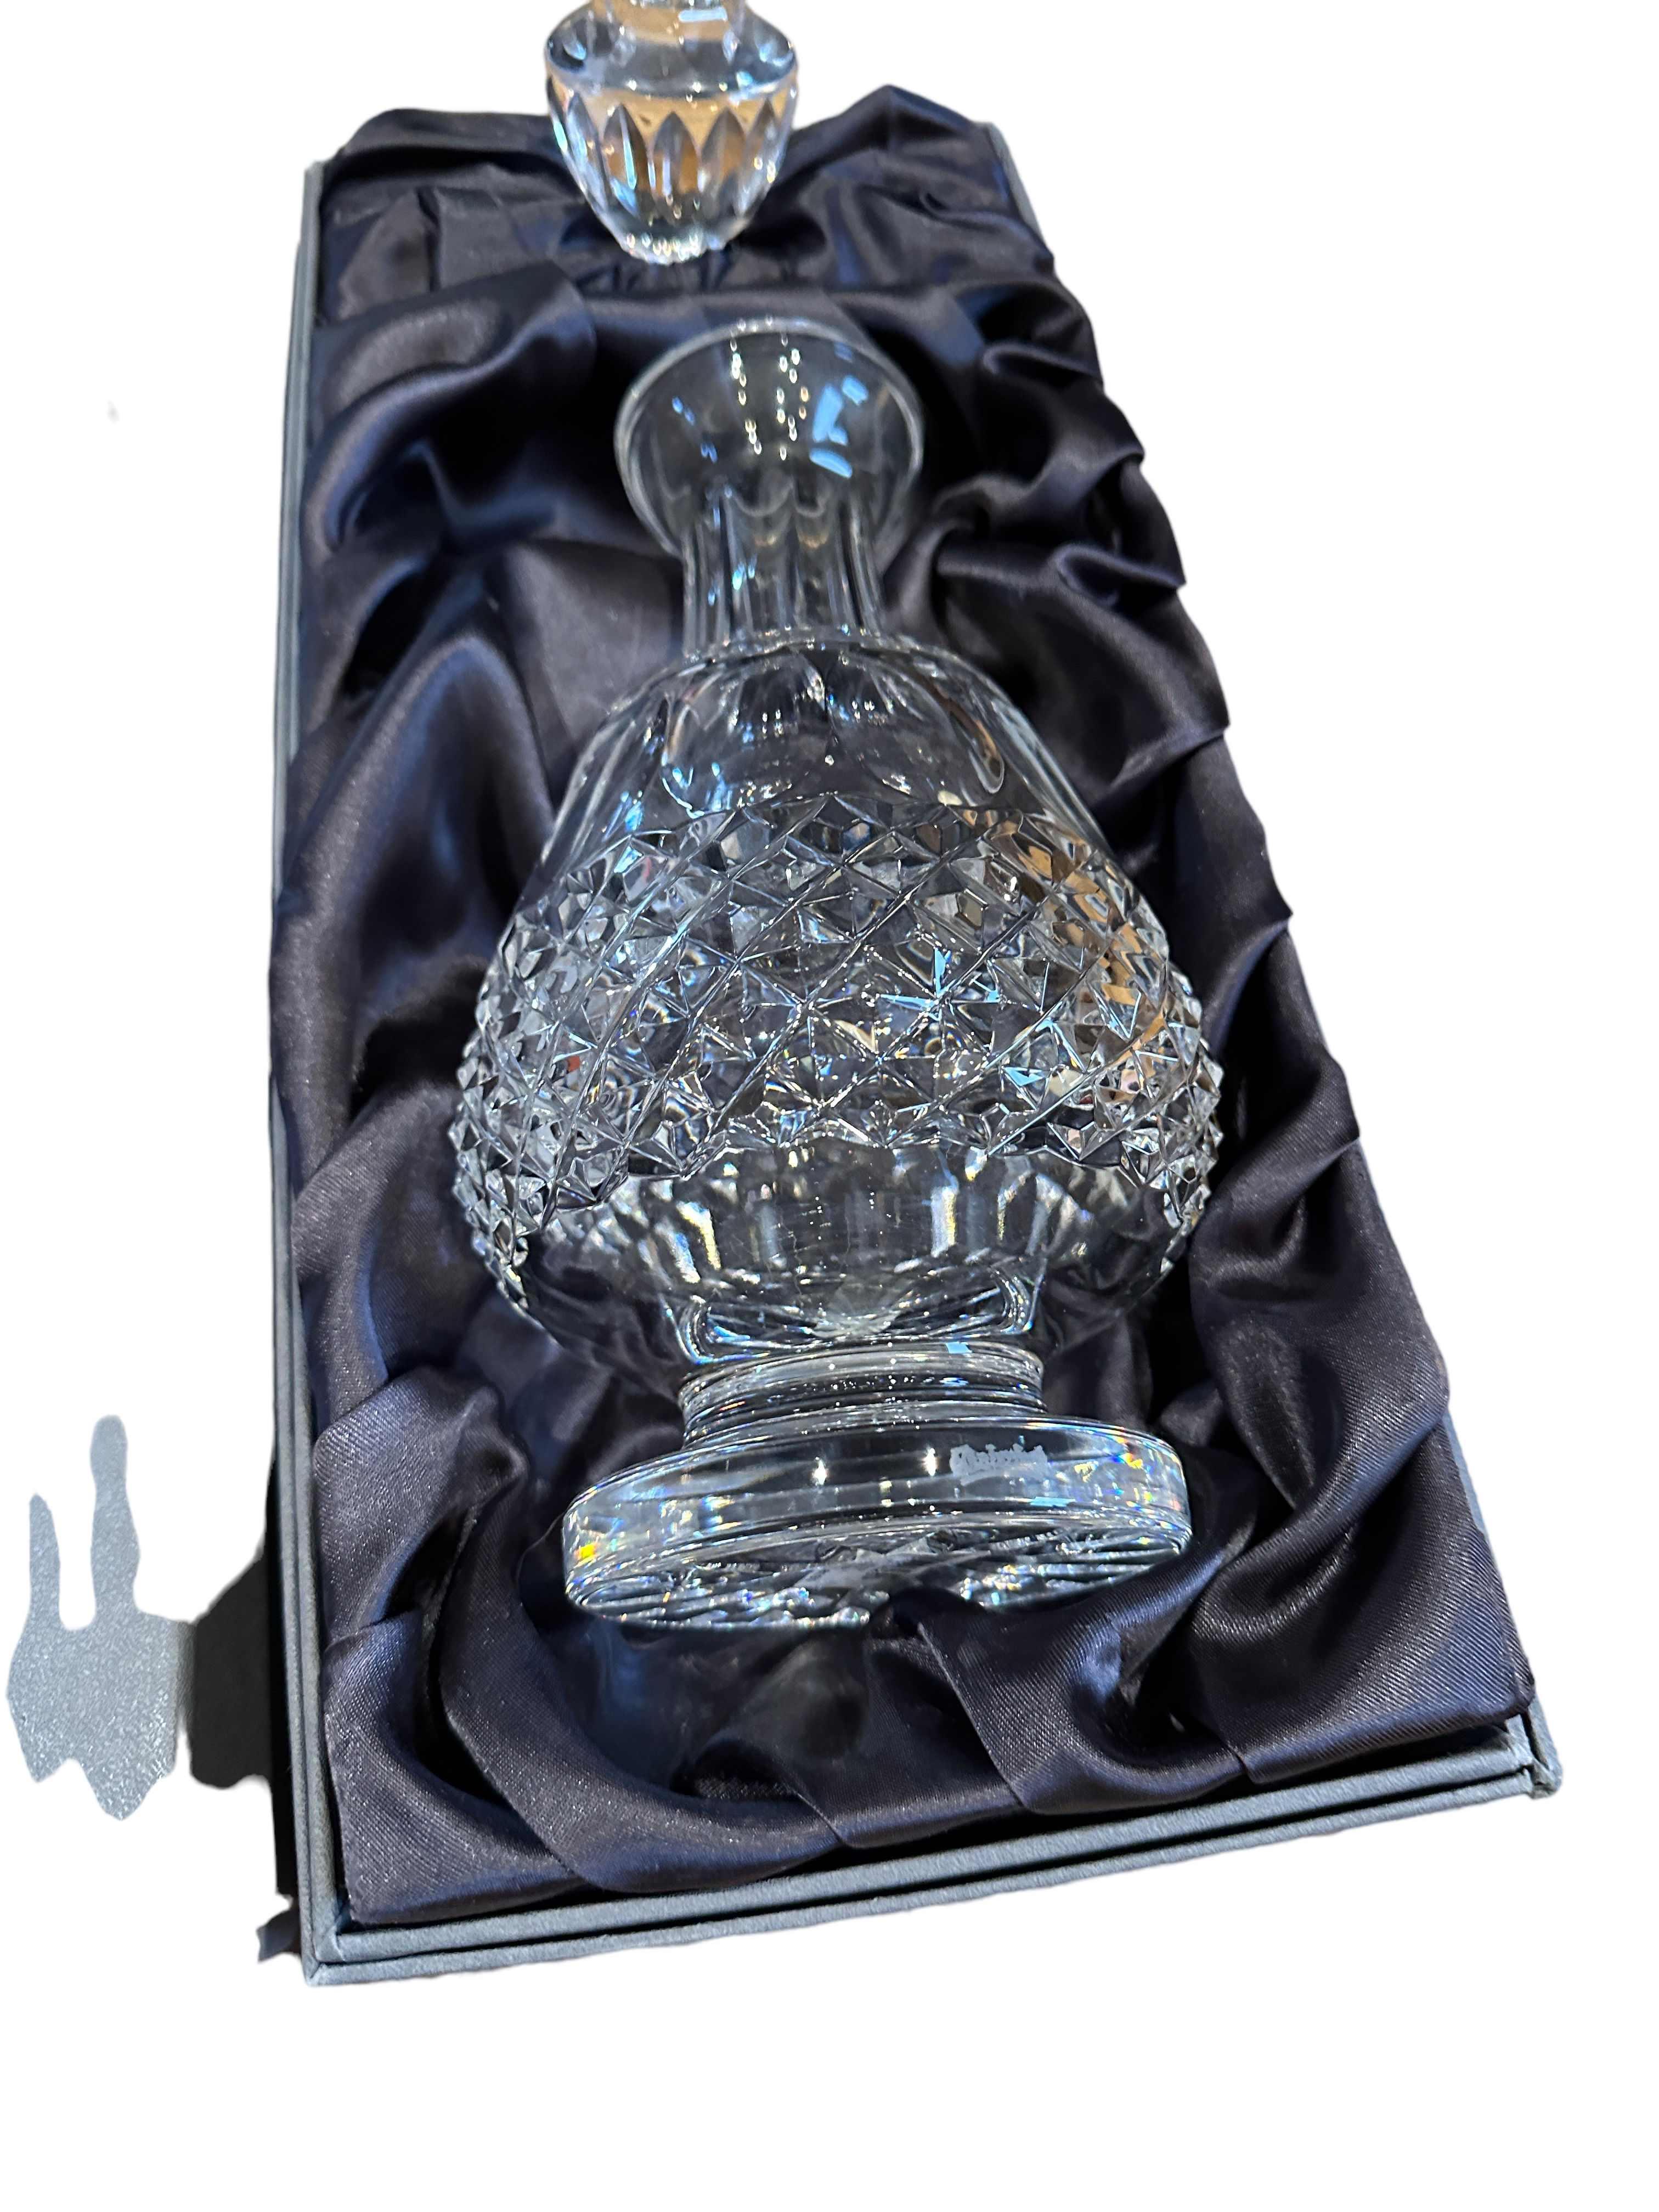 Boxed Waterford Crystal Colleen Decanter - 12 inches tall. - Image 6 of 6